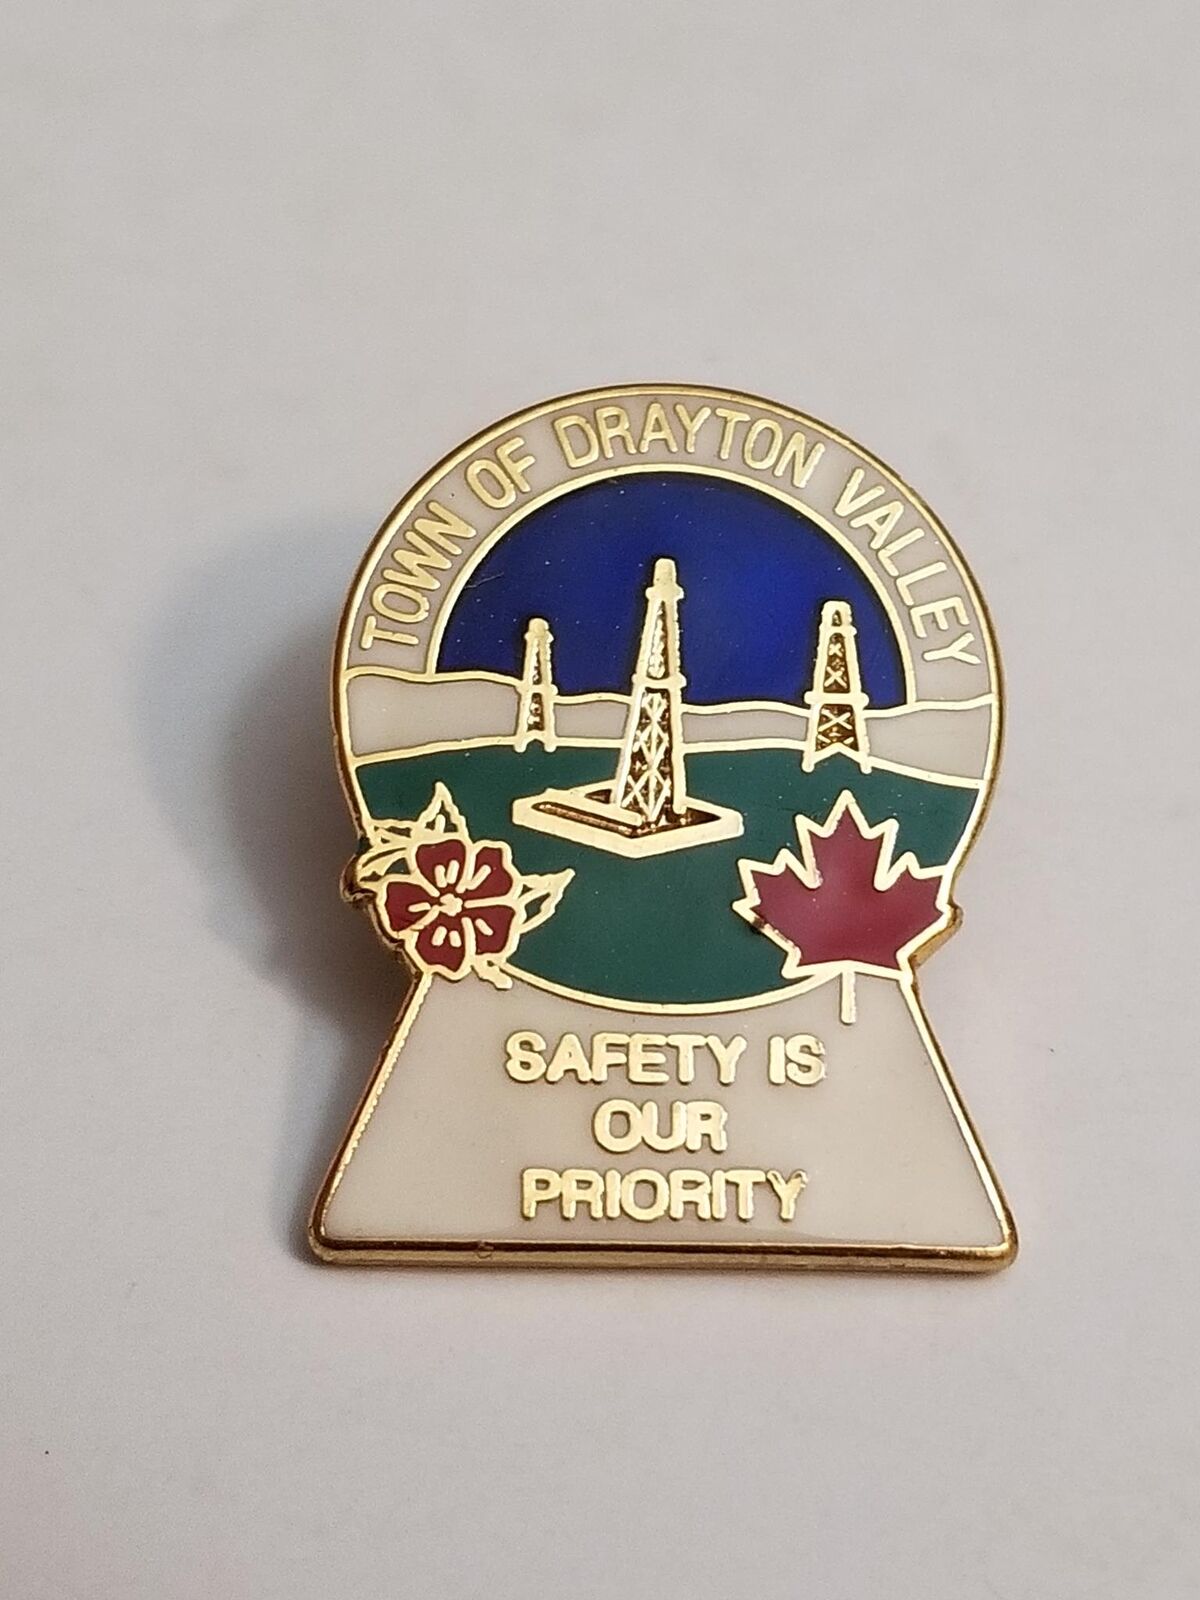 Town of Drayton Valley Alberta Safety Is Our Priority Lapel Pin 4877